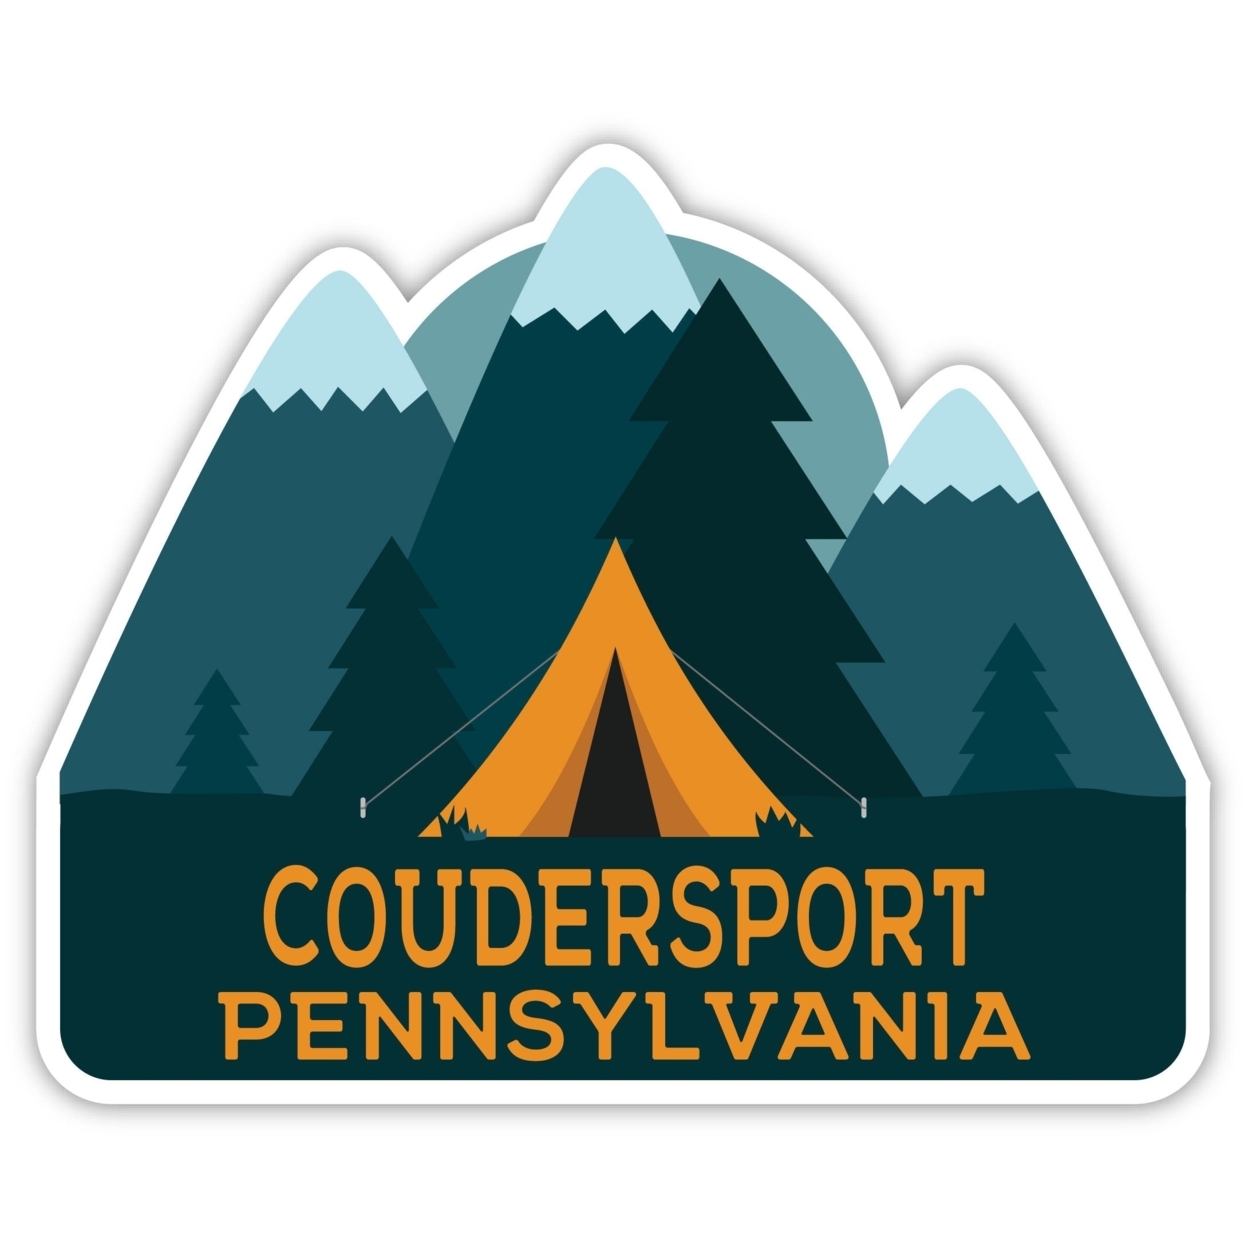 Coudersport Pennsylvania Souvenir Decorative Stickers (Choose Theme And Size) - 4-Pack, 8-Inch, Tent